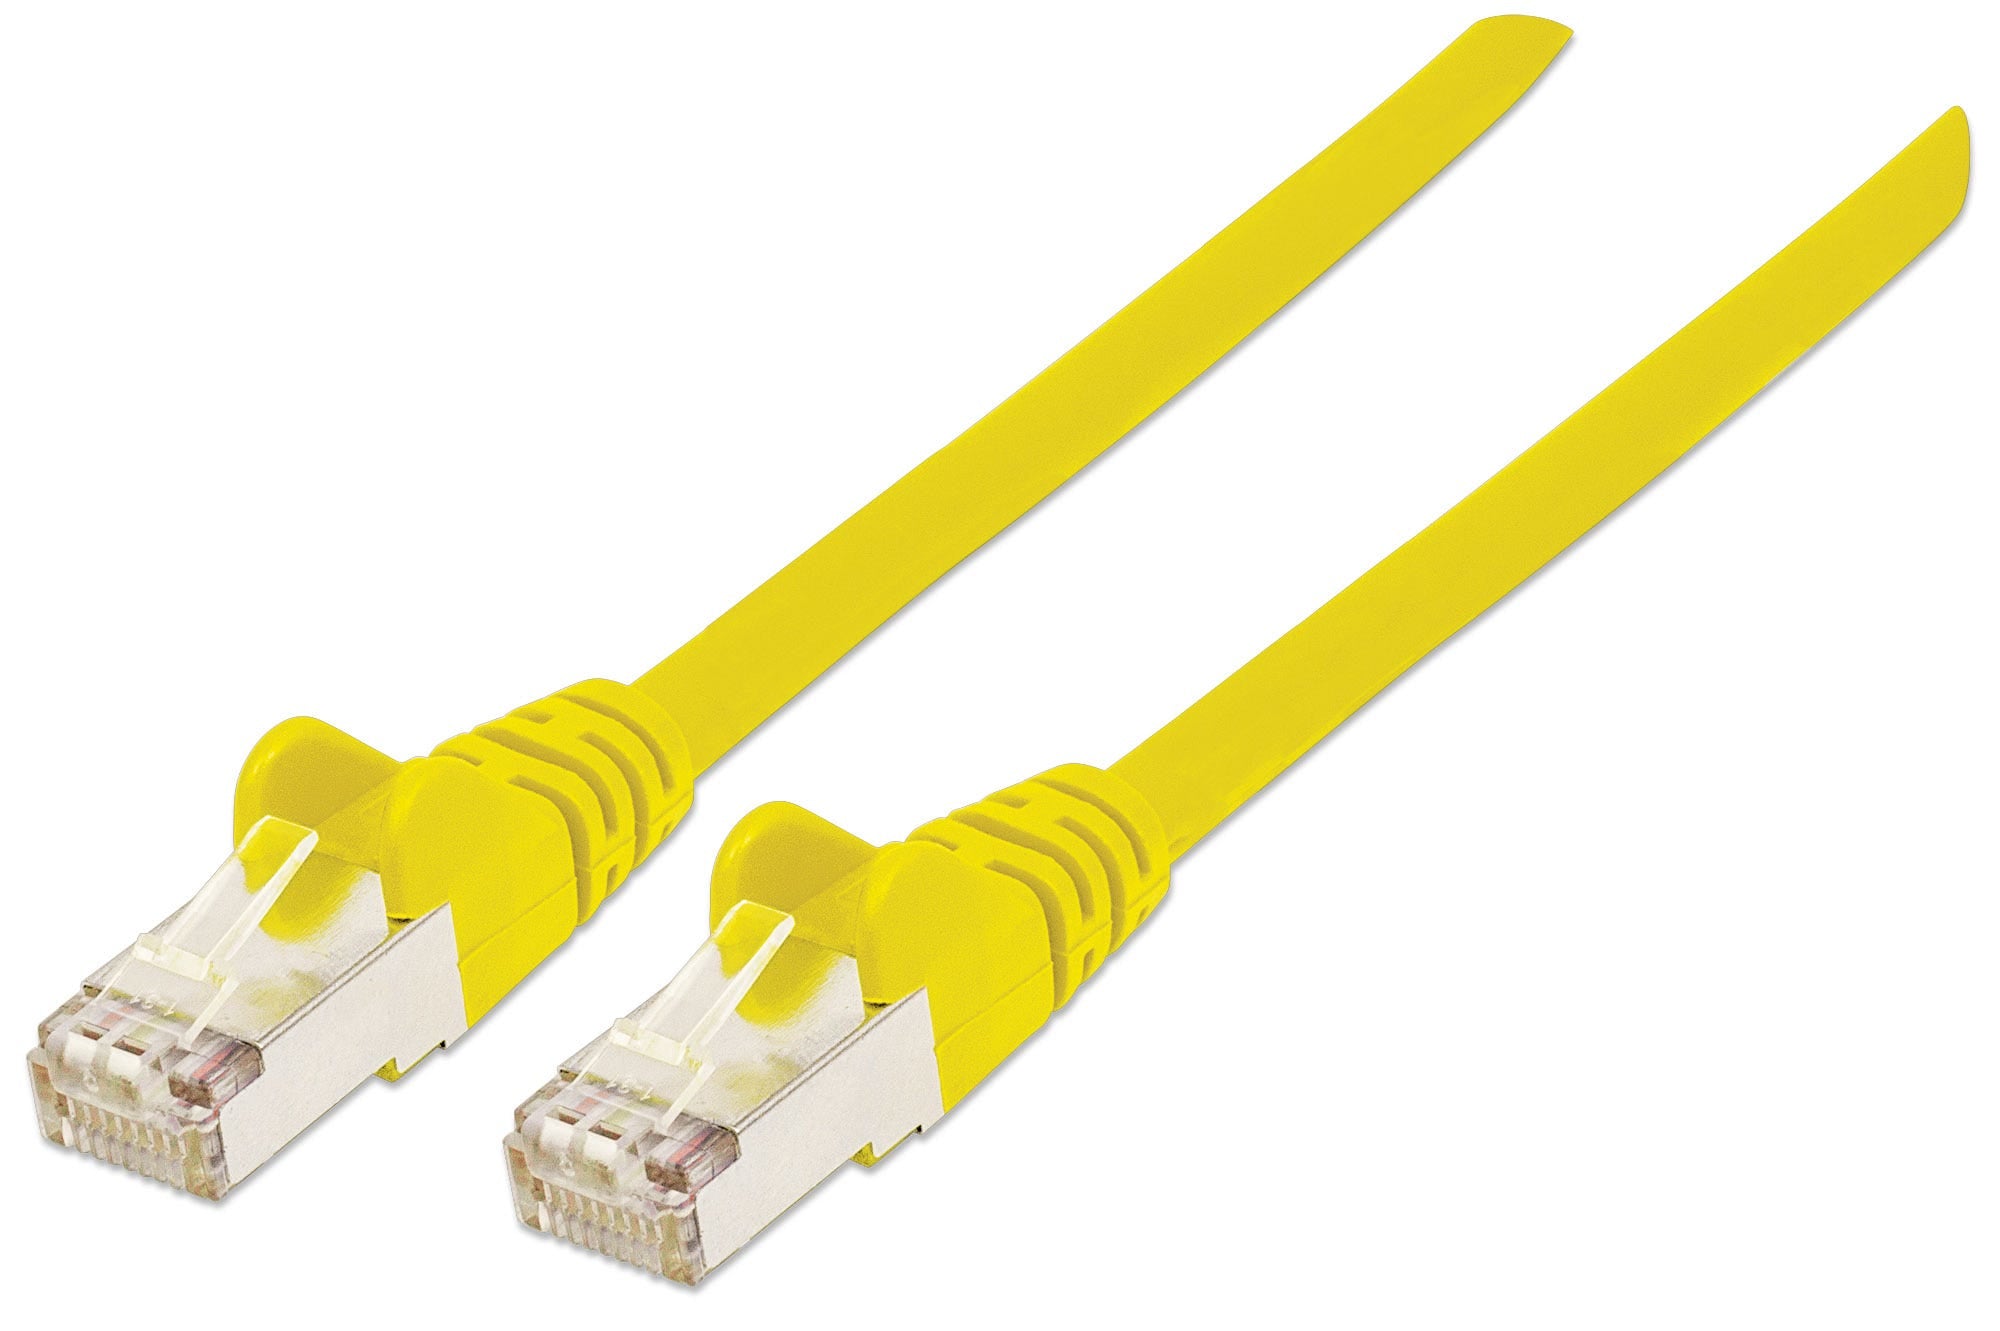 Intellinet Network Patch Cable, Cat6, 2m, Yellow, Copper, S/FTP, LSOH / LSZH, PVC, RJ45, Gold Plated Contacts, Snagless, Booted, Lifetime Warranty, Polybag